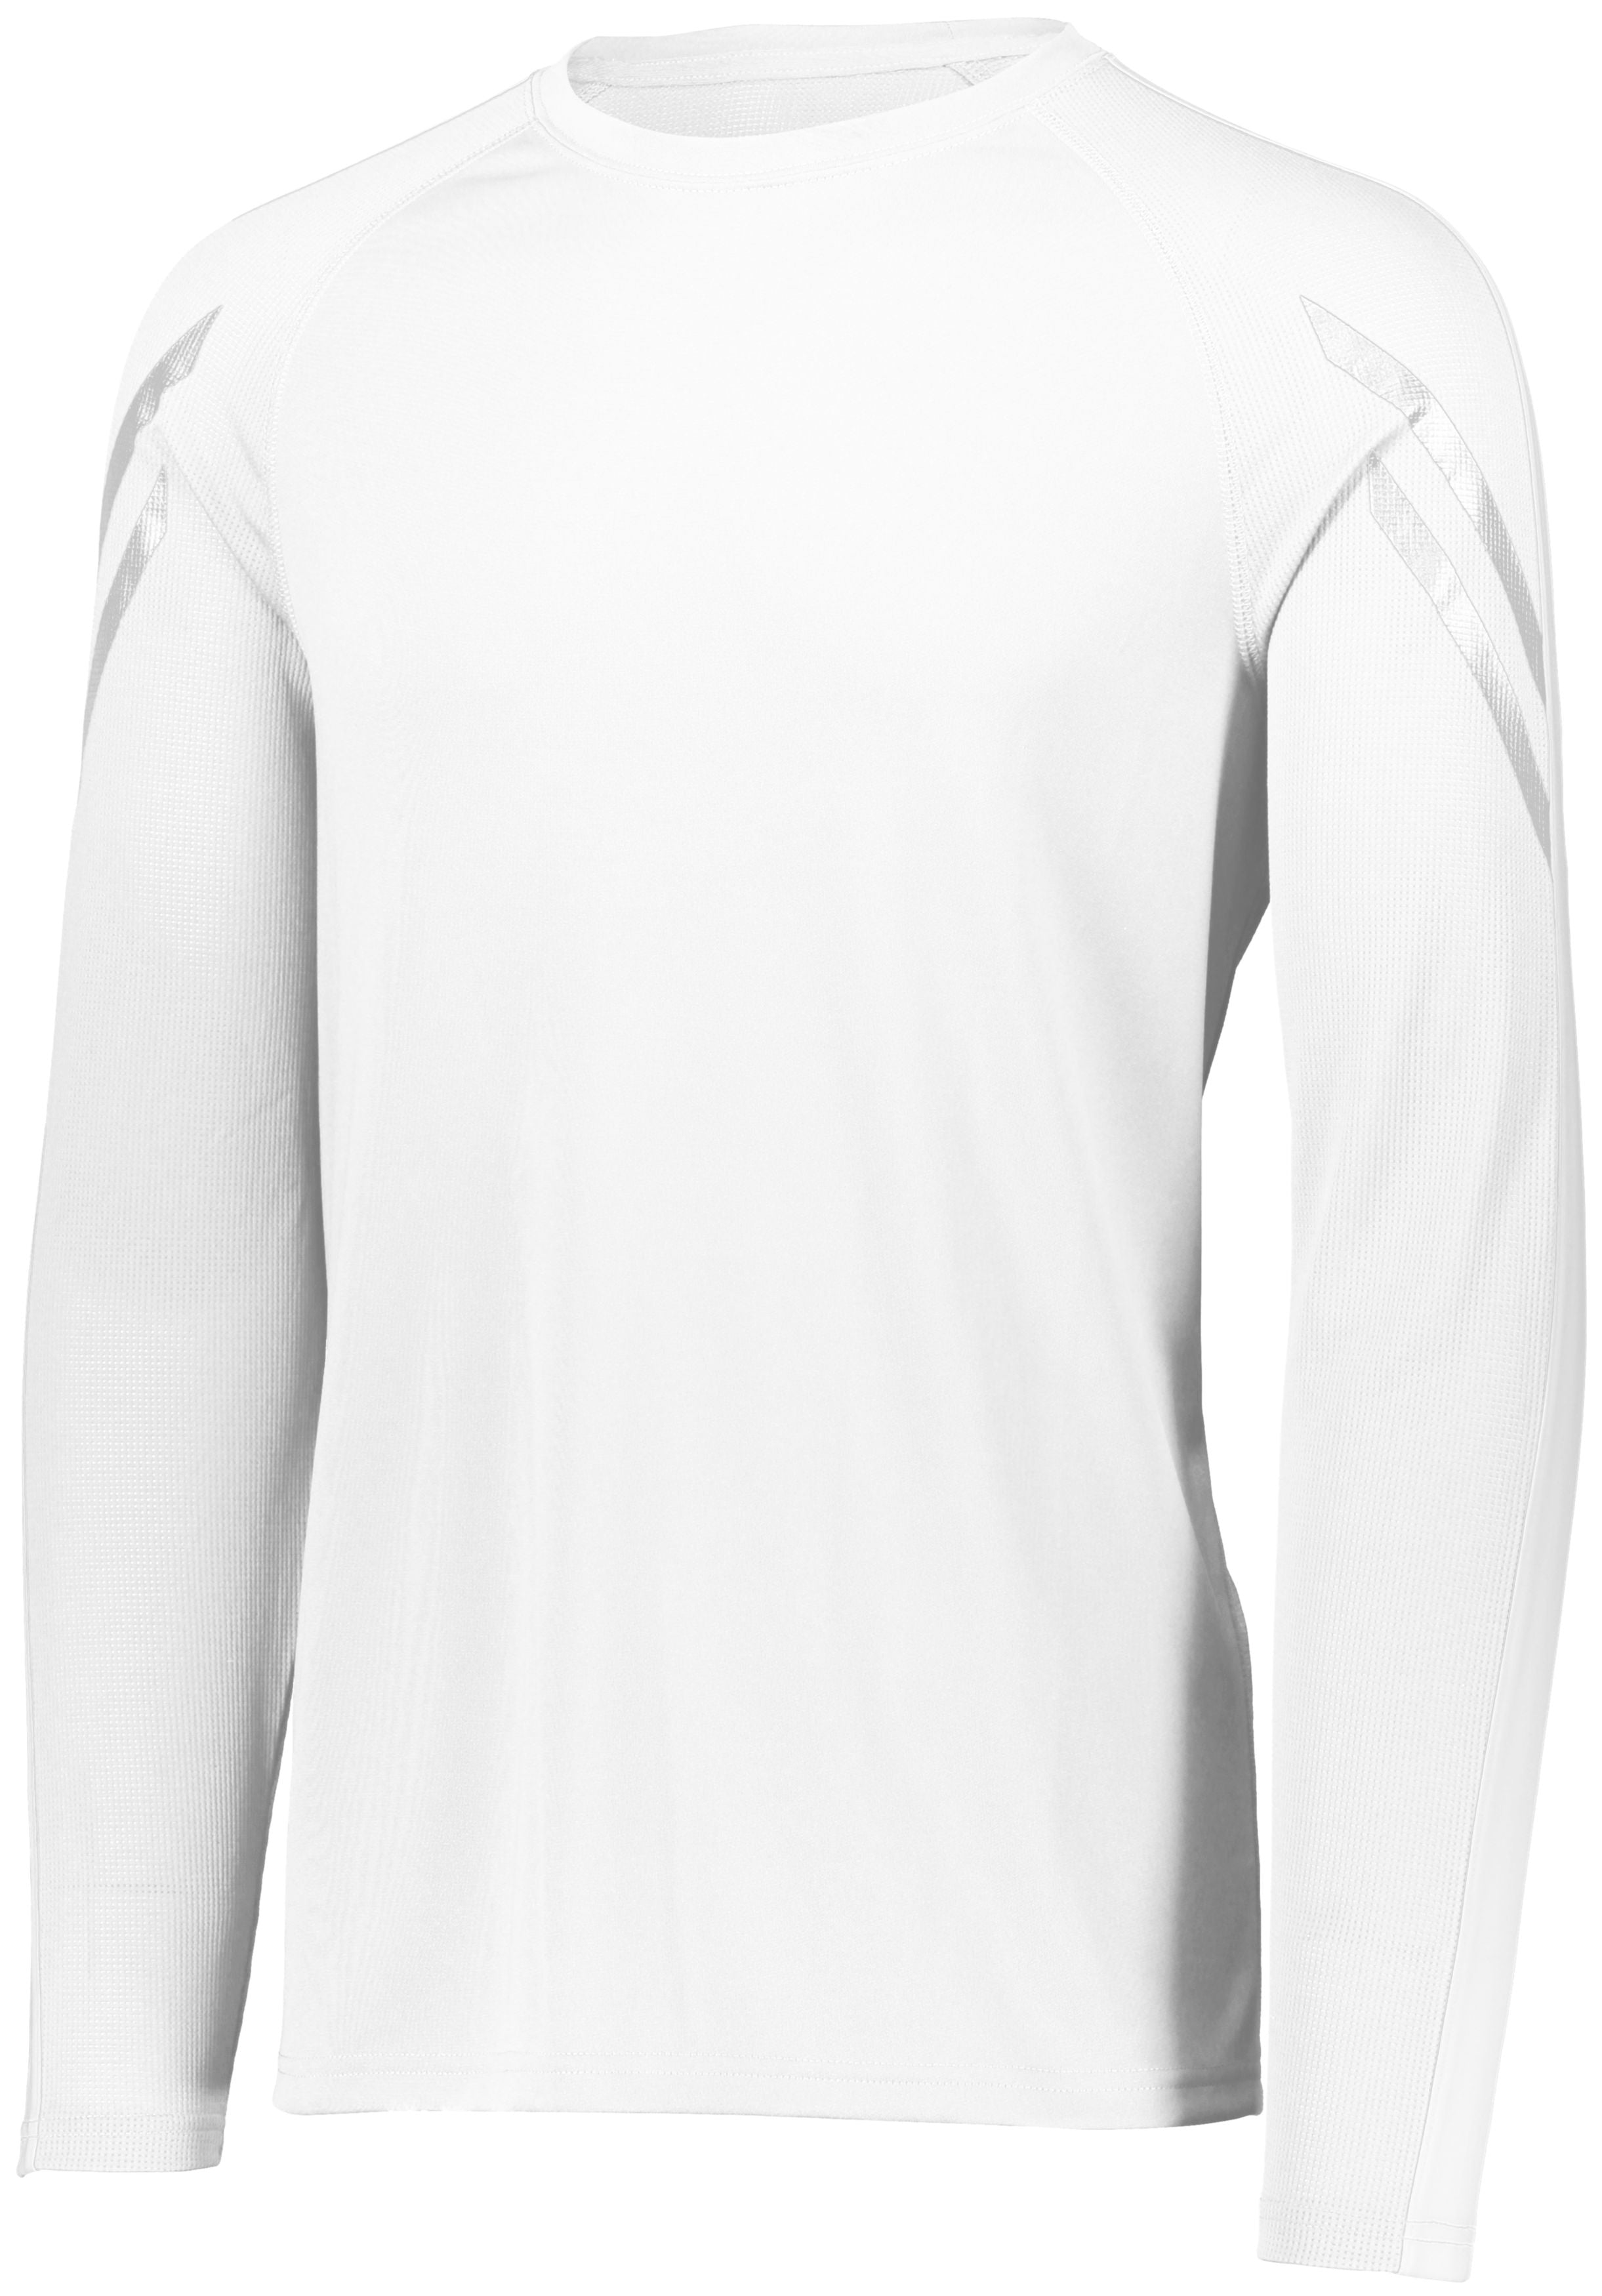 Holloway Flux Shirt Long Sleeve in White  -Part of the Adult, Holloway, Shirts, Flux-Collection product lines at KanaleyCreations.com